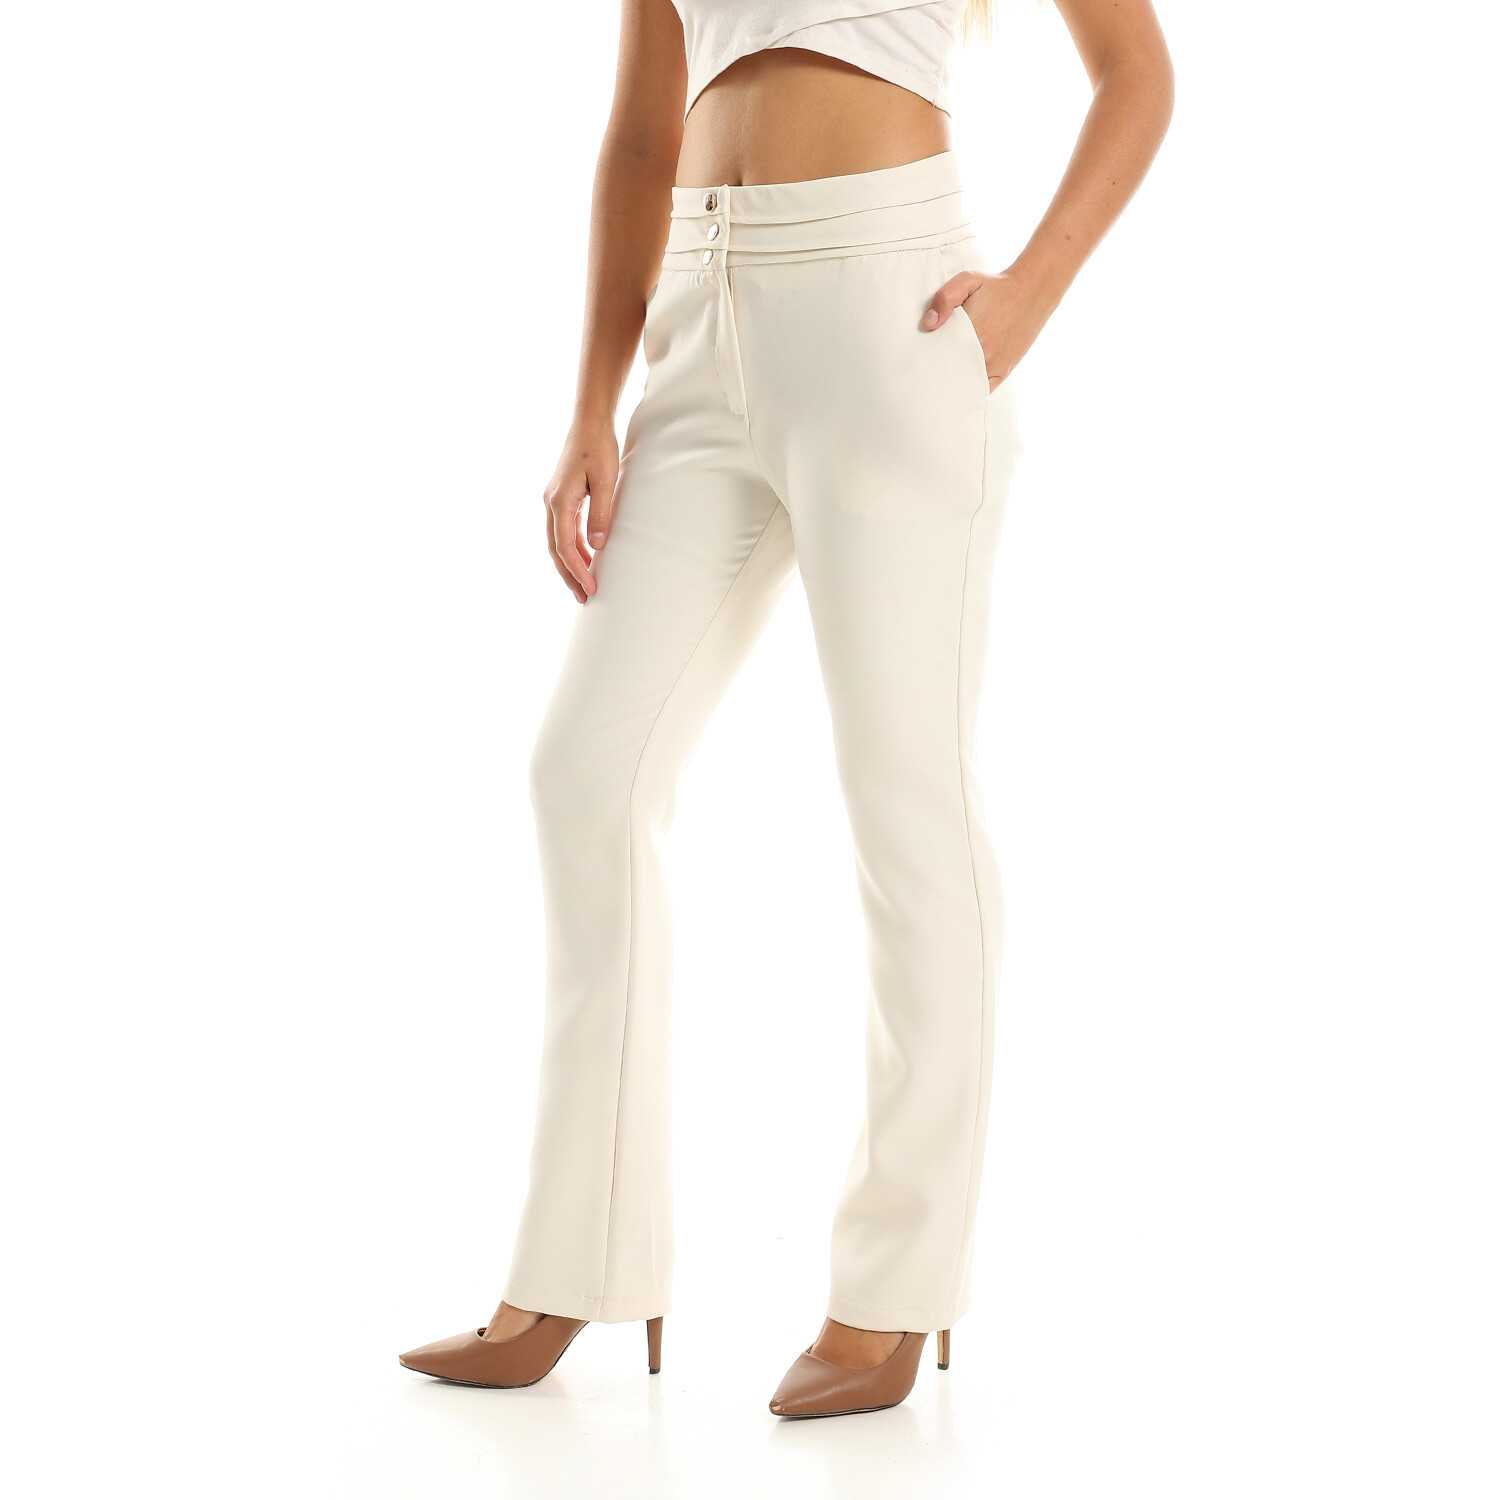 Straight Leg Smart Pants With Gold Buttons - Off White-2918